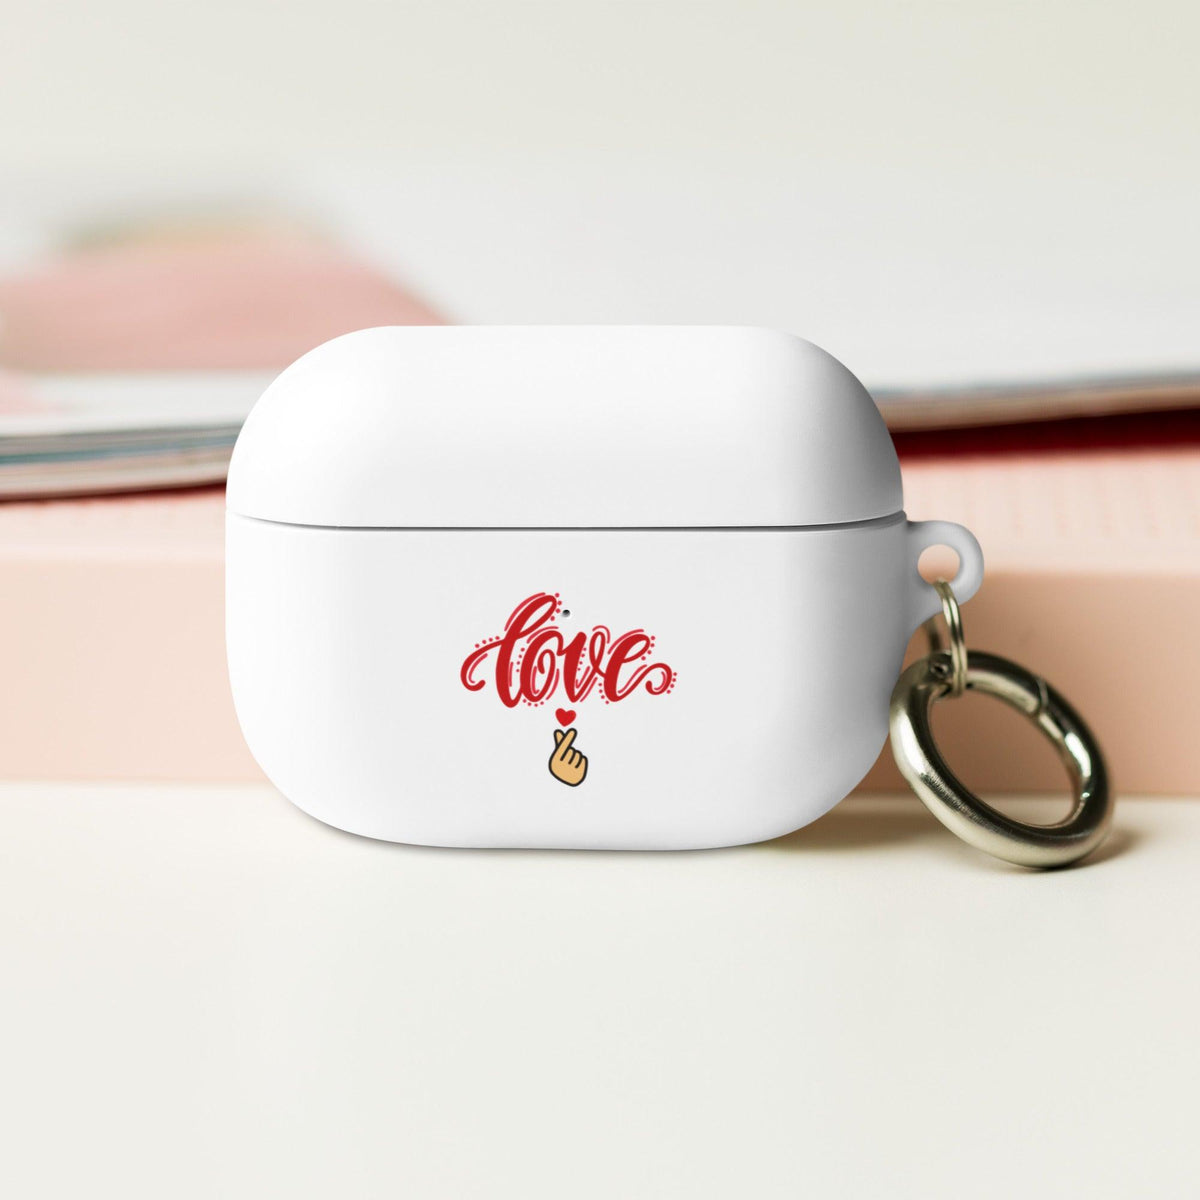 Love AirPods case - Eventwisecreations